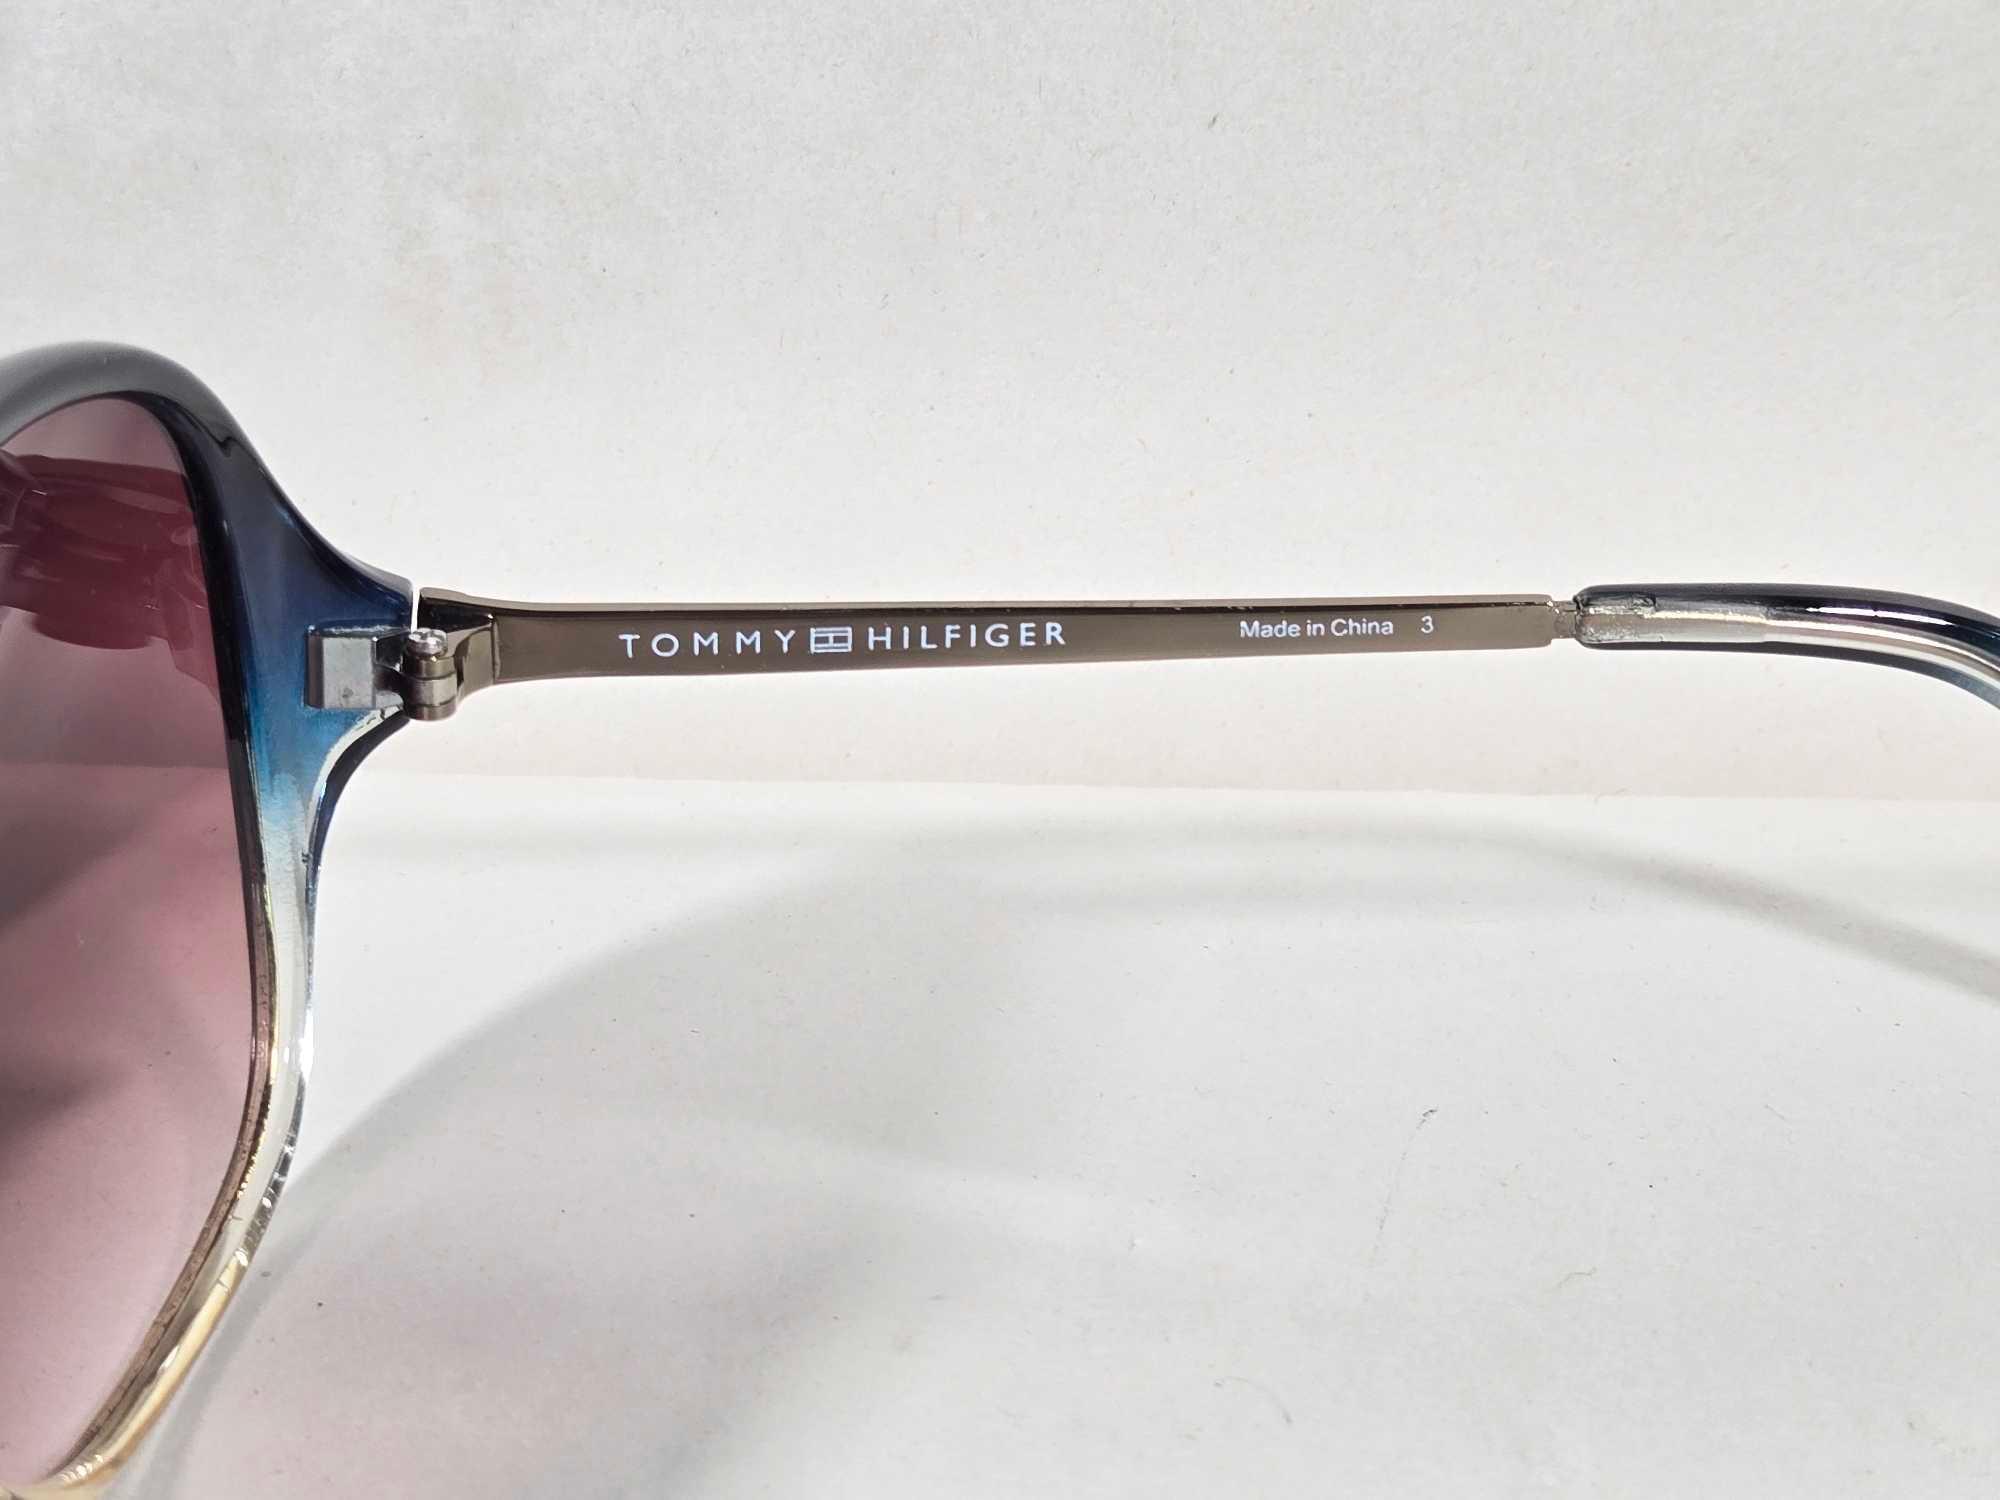 4 Pair of Women's Vintage Sunglasses Incl. Tommy Hilfiger